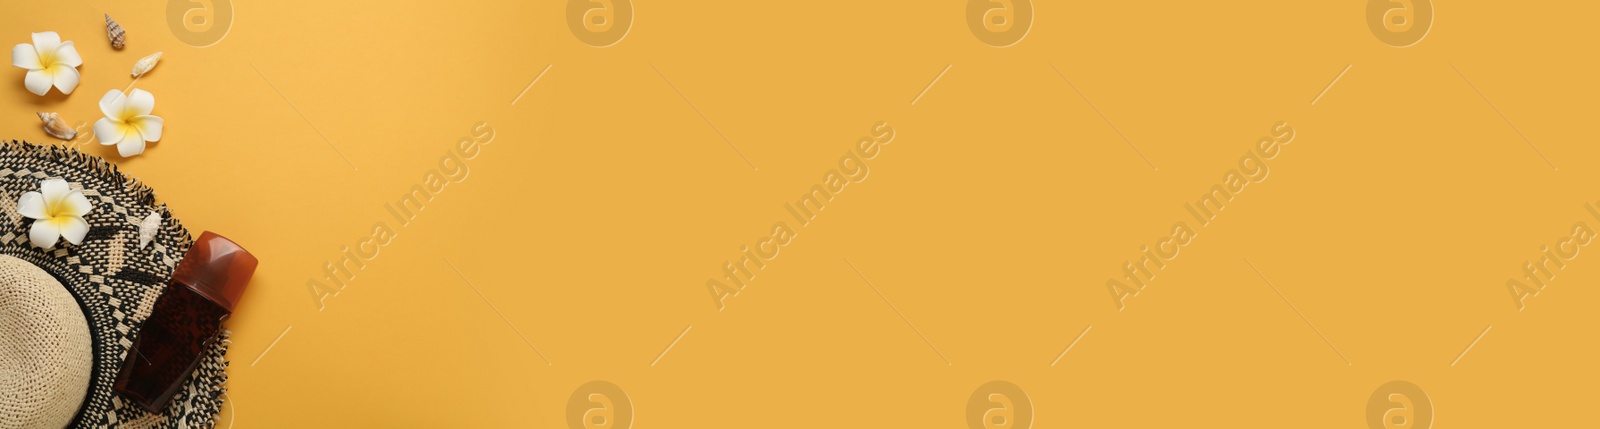 Photo of Sun protection cream and beach accessories on orange background, flat lay. Space for text